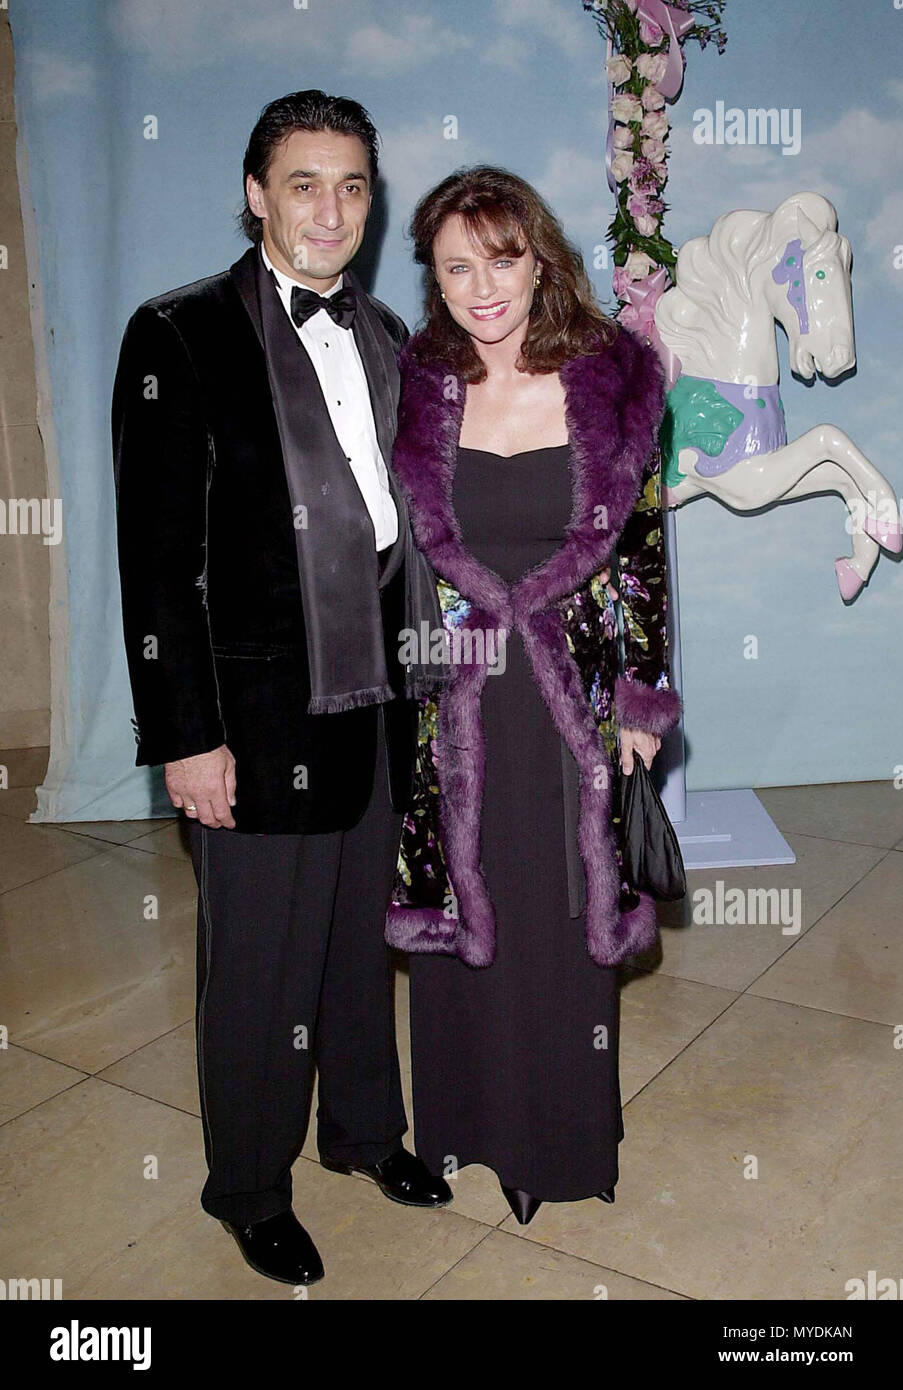 28 Oct 2000, Los Angeles, California, USA --- Original caption: The Carousel of Hope, a benefit for the Children's Diabetes Foundation was held at the Beverly Hilton, in Los Angeles. --- Image by © . / USAJacqueline Bisset with Emin Boztepe Red Carpet Event, Vertical, USA, Film Industry, Celebrities,  Photography, Bestof, Arts Culture and Entertainment, Topix Celebrities fashion /  Vertical, Best of, Event in Hollywood Life - California,  Red Carpet and backstage, USA, Film Industry, Celebrities,  movie celebrities, TV celebrities, Music celebrities, Photography, Bestof, Arts Culture and Enter Stock Photo